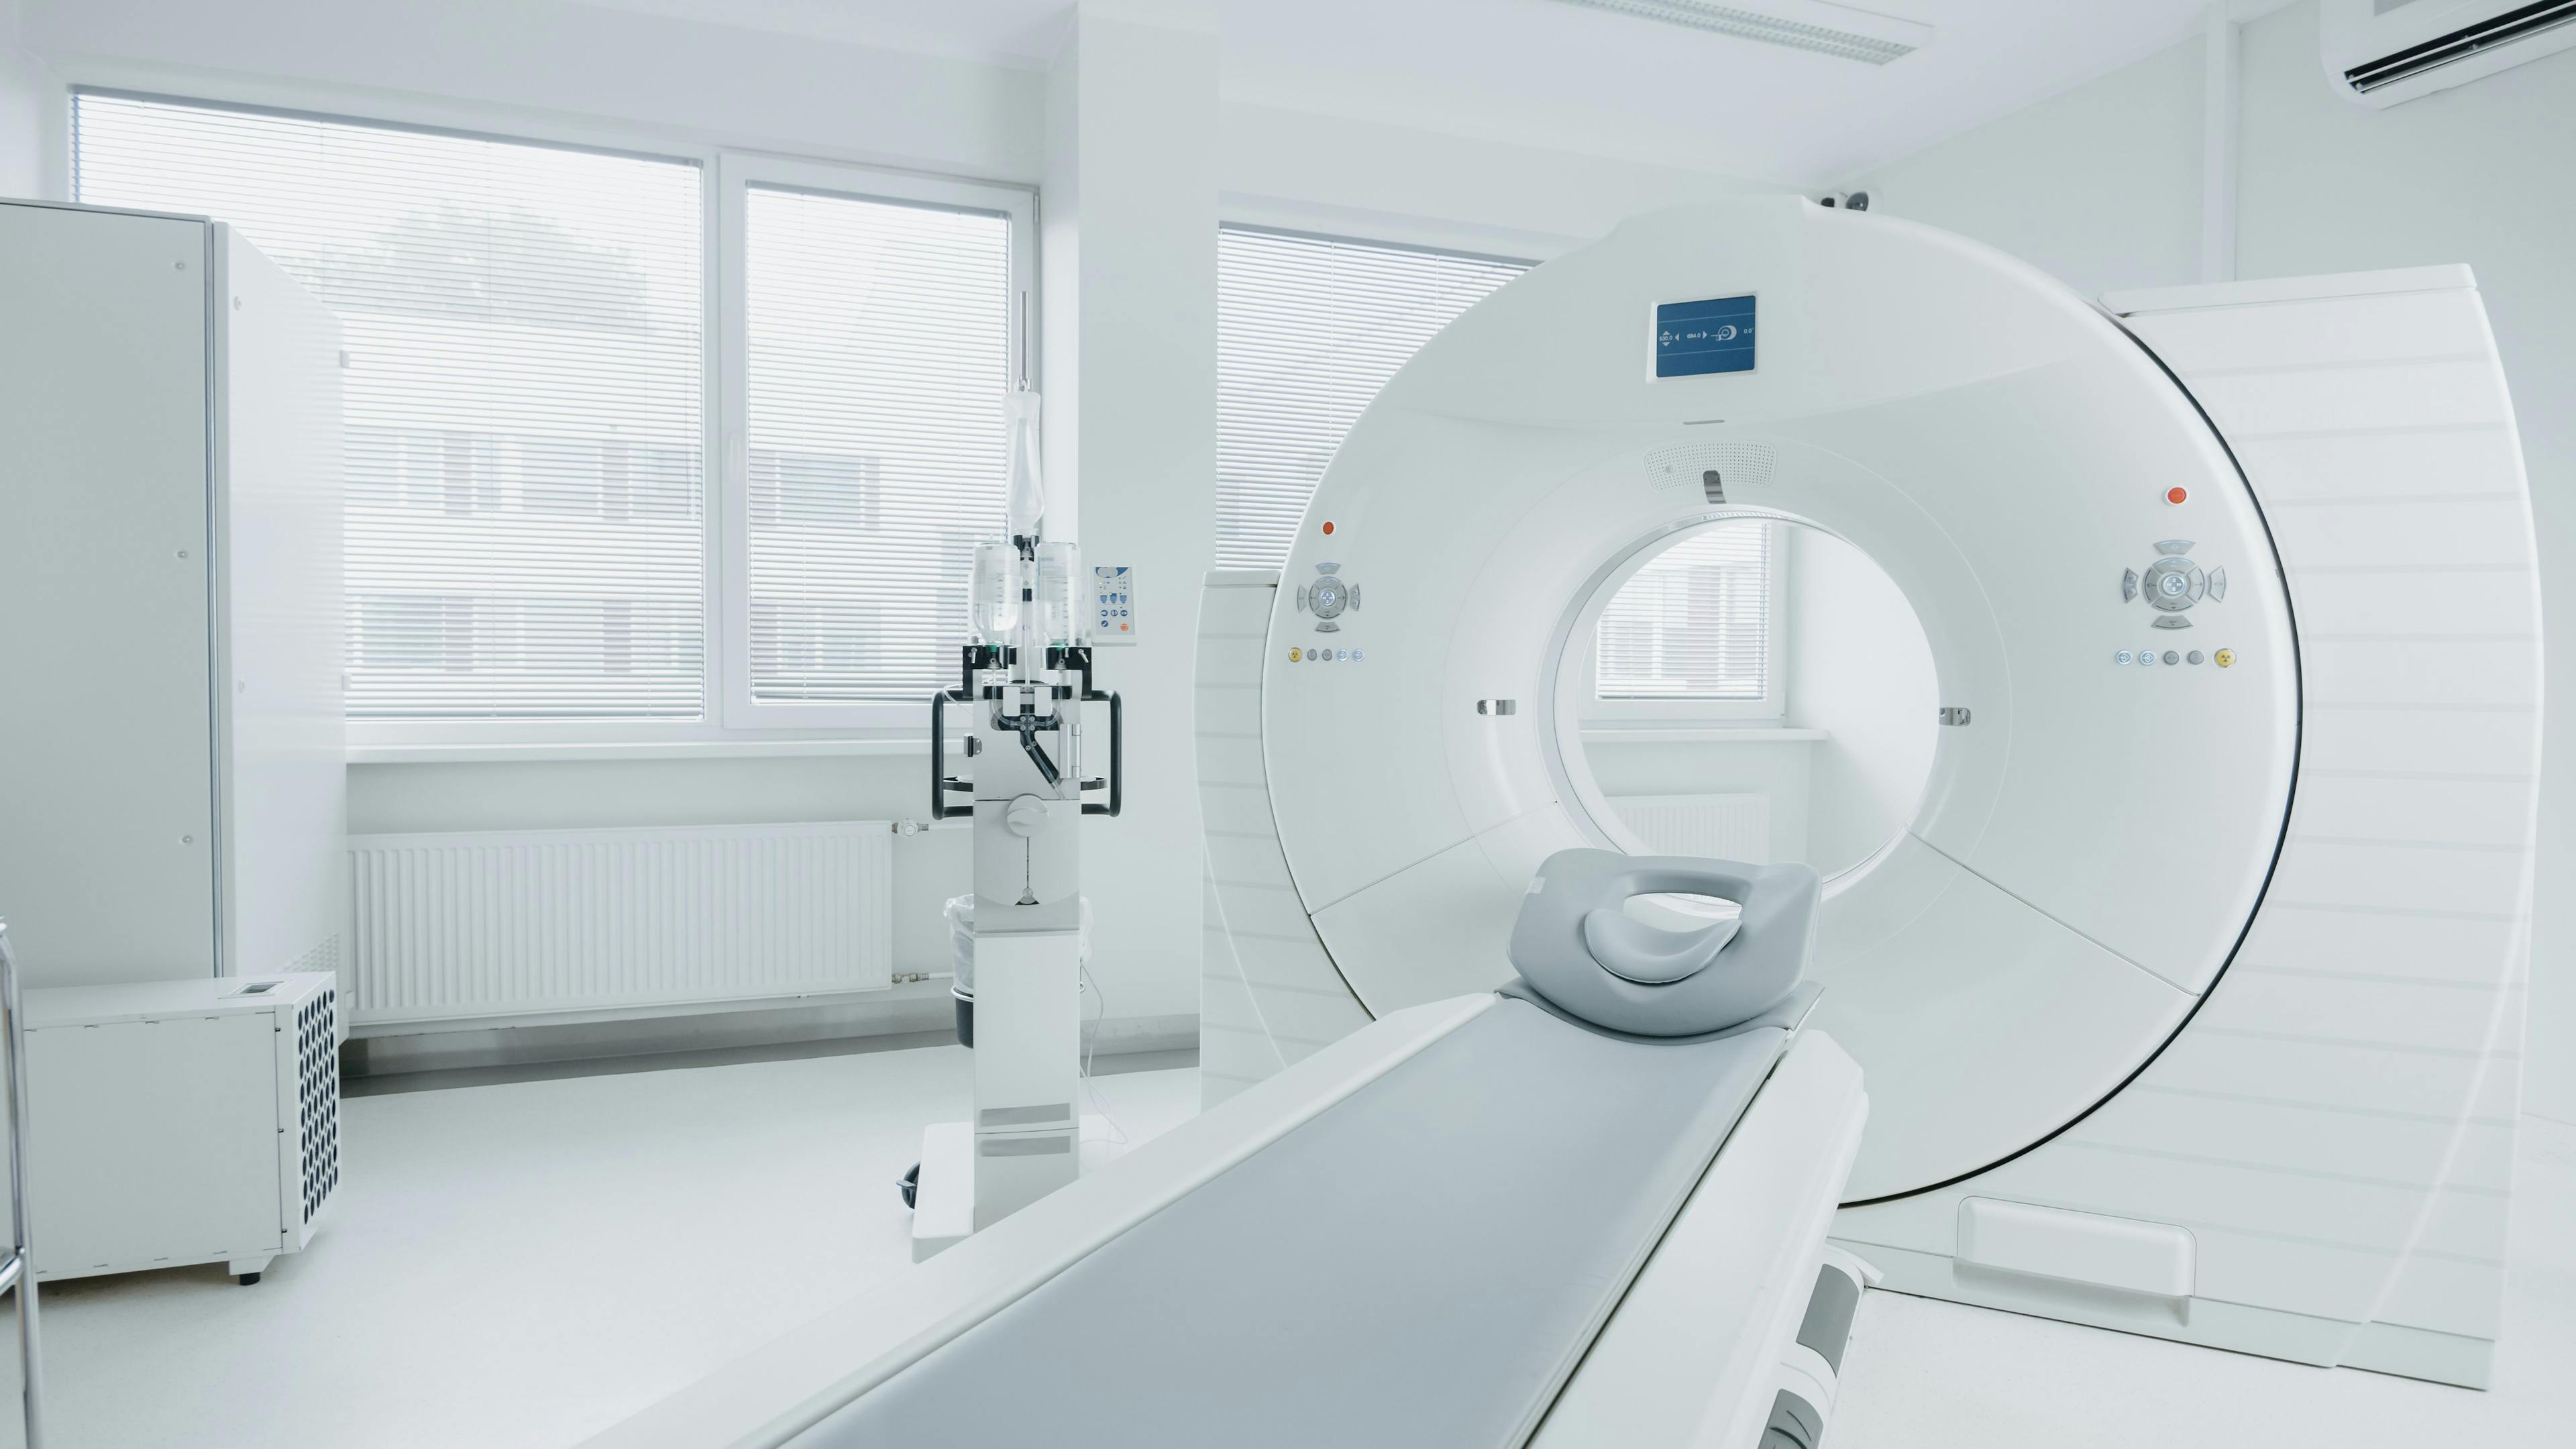 Image Credit: © Gorodenkoff - www.stock.adobe.com | Medical CT or MRI or PET Scan Standing in the Modern Hospital Laboratory. Technologically Advanced and Functional Mediсal Equipment in a Clean White Room.